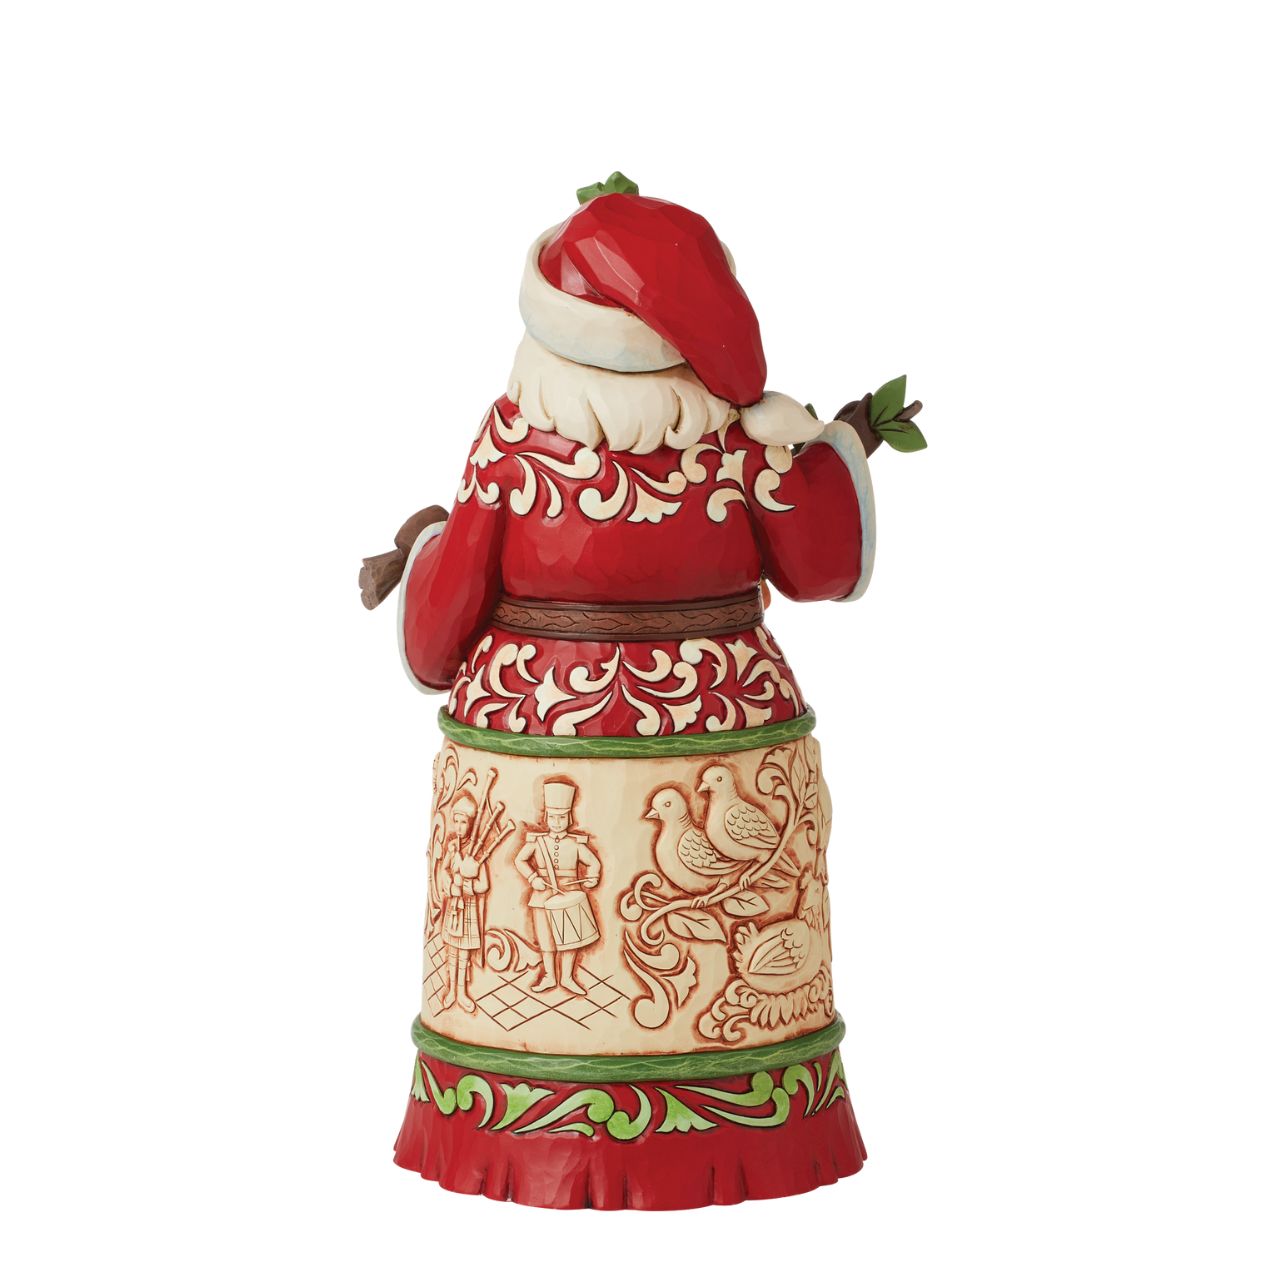 Heartwood Creek 12 Days of Christmas Santa Figurine World Wide Event  Designed by award winning artist Jim Shore as part of the Heartwood Creek World Wide Even for 2023, hand crafted using high quality cast stone and hand painted, this Santa figurine is perfect for the Christmas season.